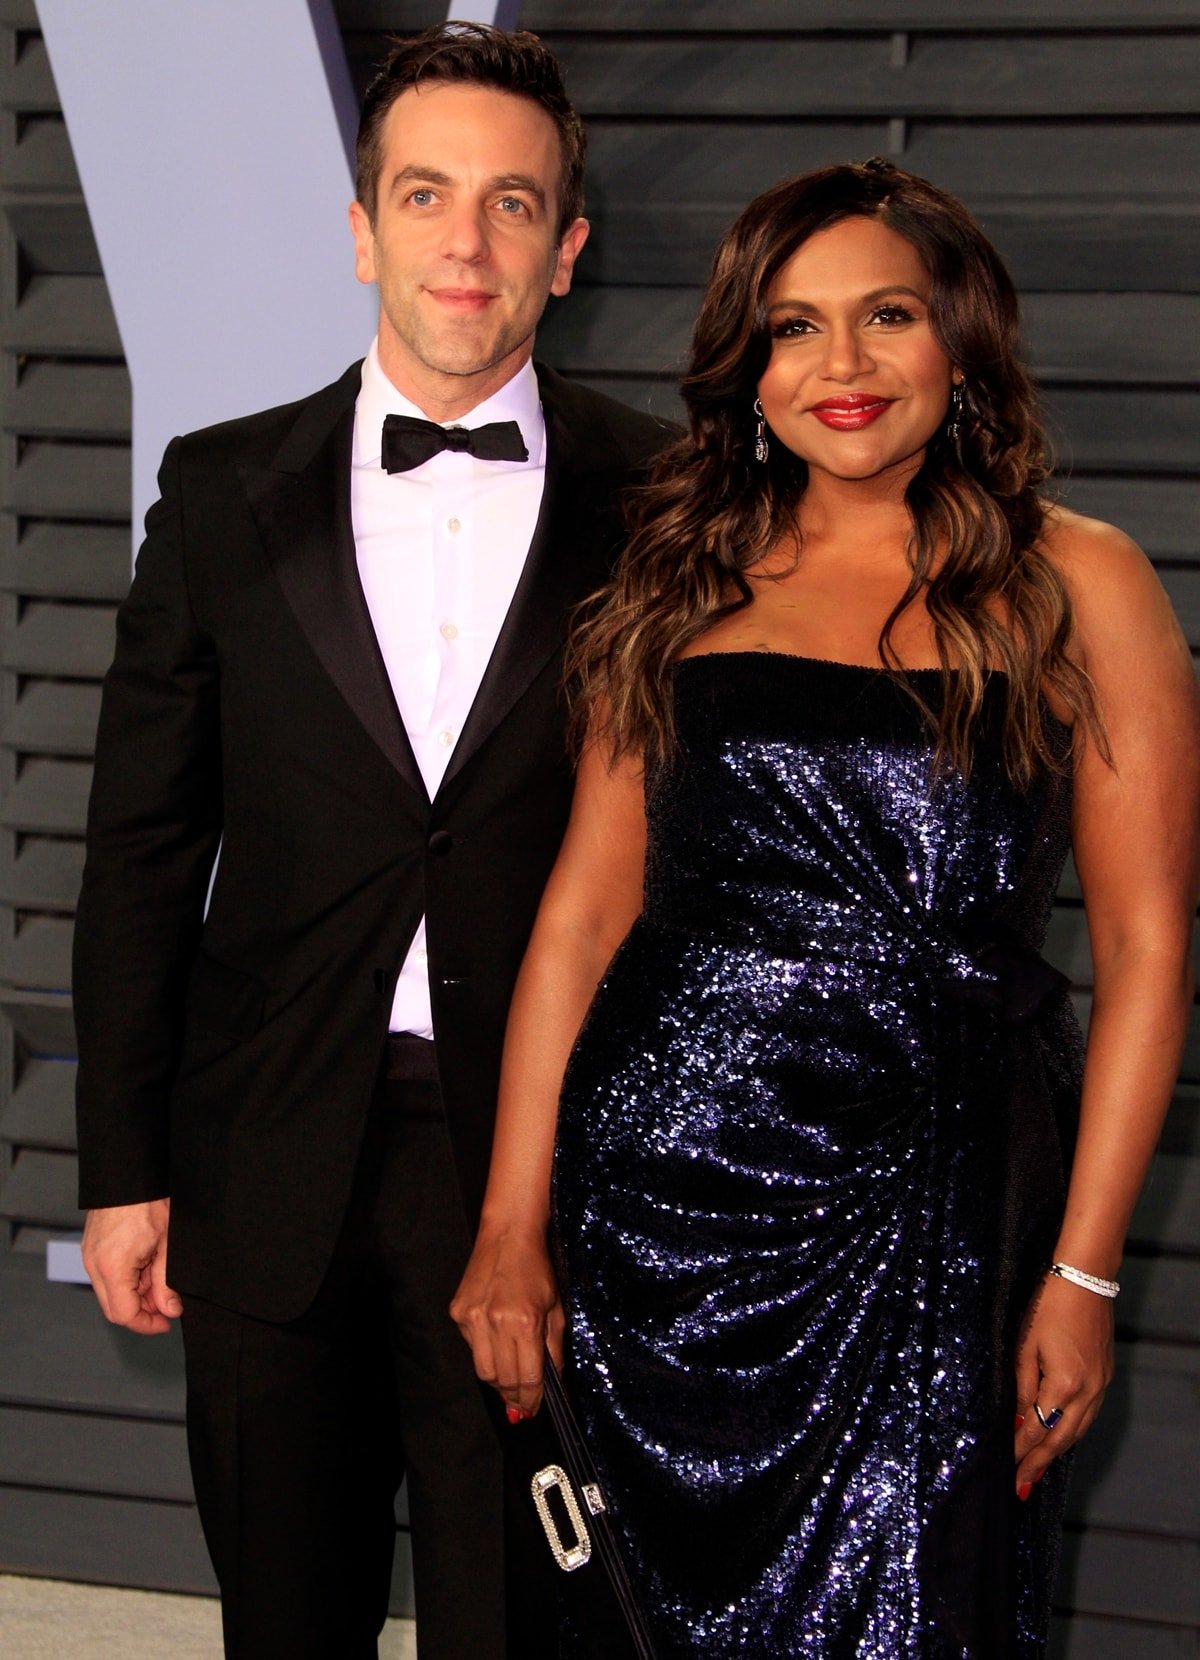 "The Office" co-stars Mindy Kaling and B. J. Novak dated on-and-off between 2004 and 2007 and he's rumored to be the father of her children